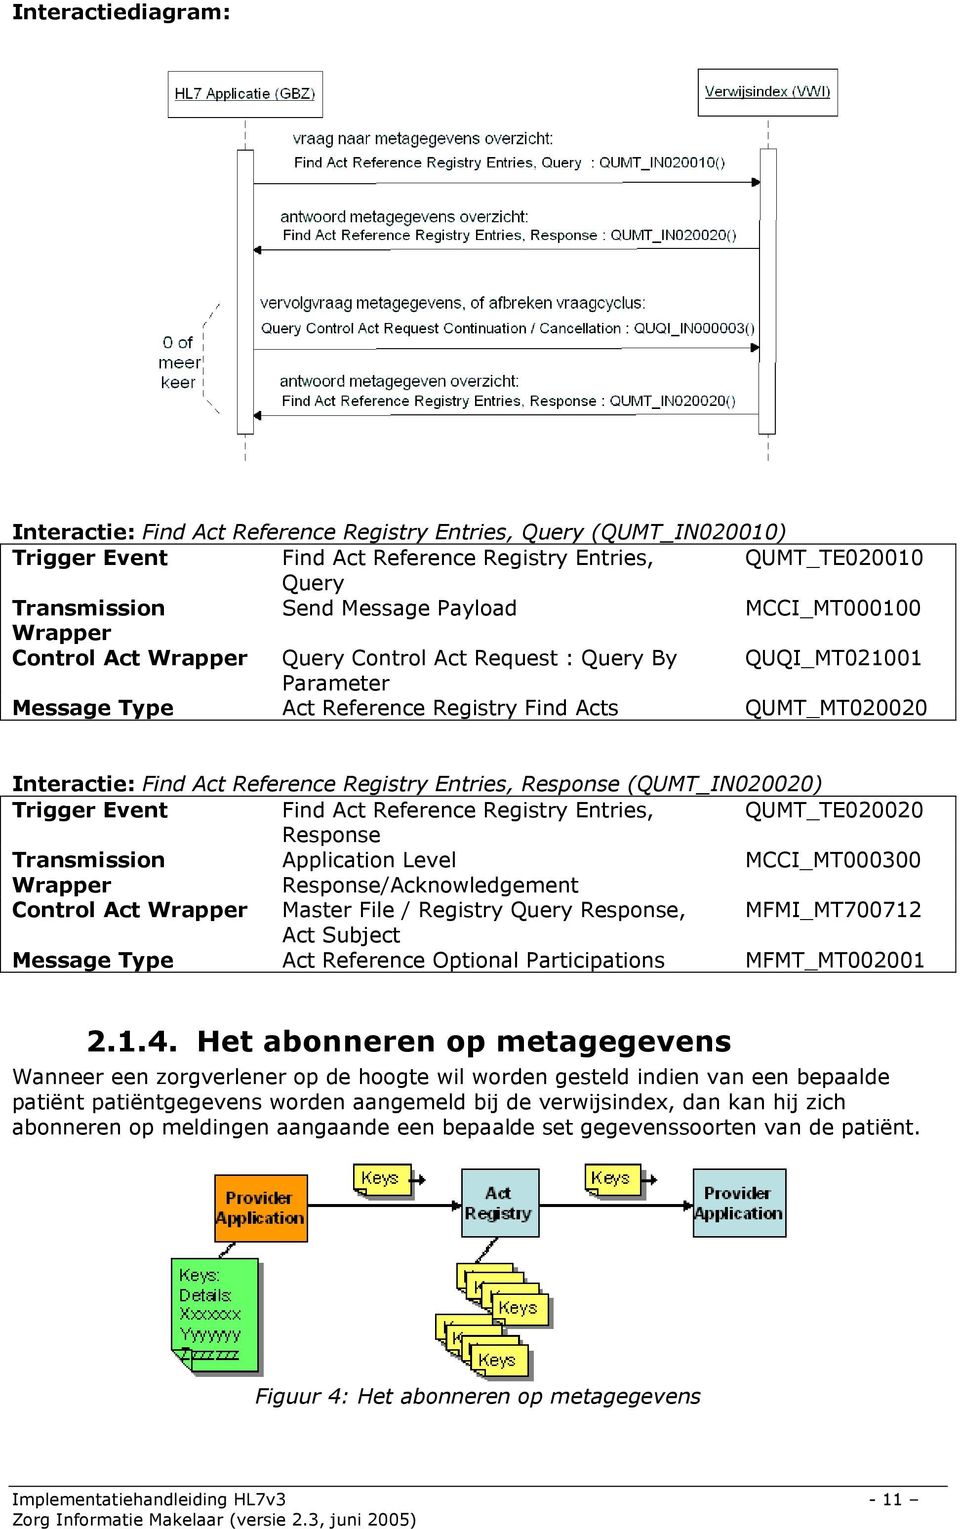 Registry Entries, Response (QUMT_IN020020) Trigger Event Find Act Reference Registry Entries, QUMT_TE020020 Response Transmission Application Level MCCI_MT000300 Wrapper Response/Acknowledgement